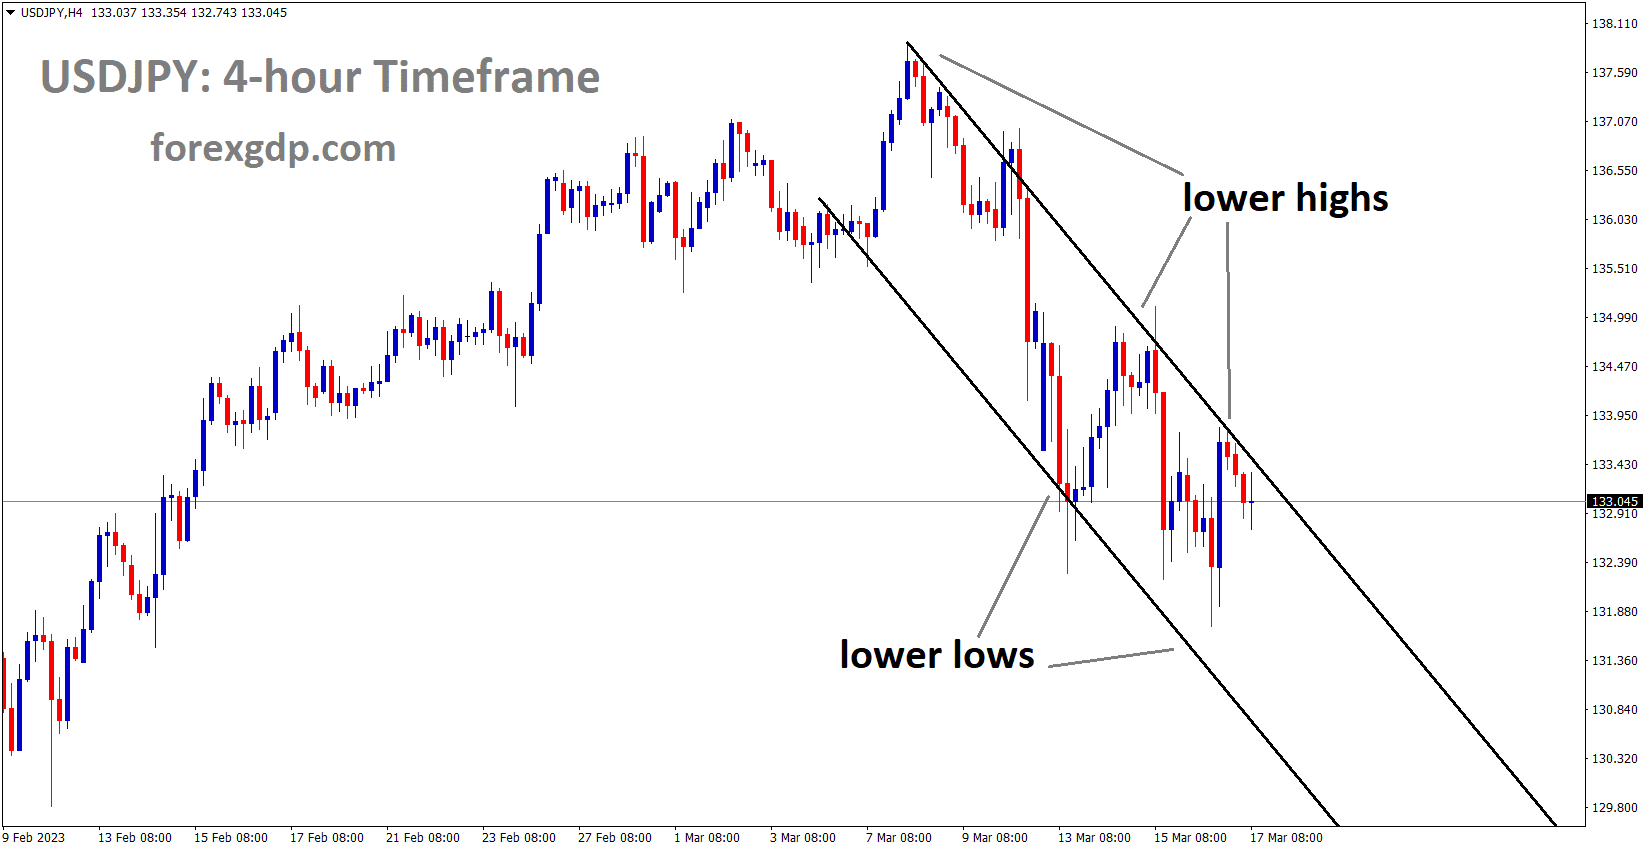 USDJPY is moving in the Descending channel and the market has fallen from the lower high area oft channel